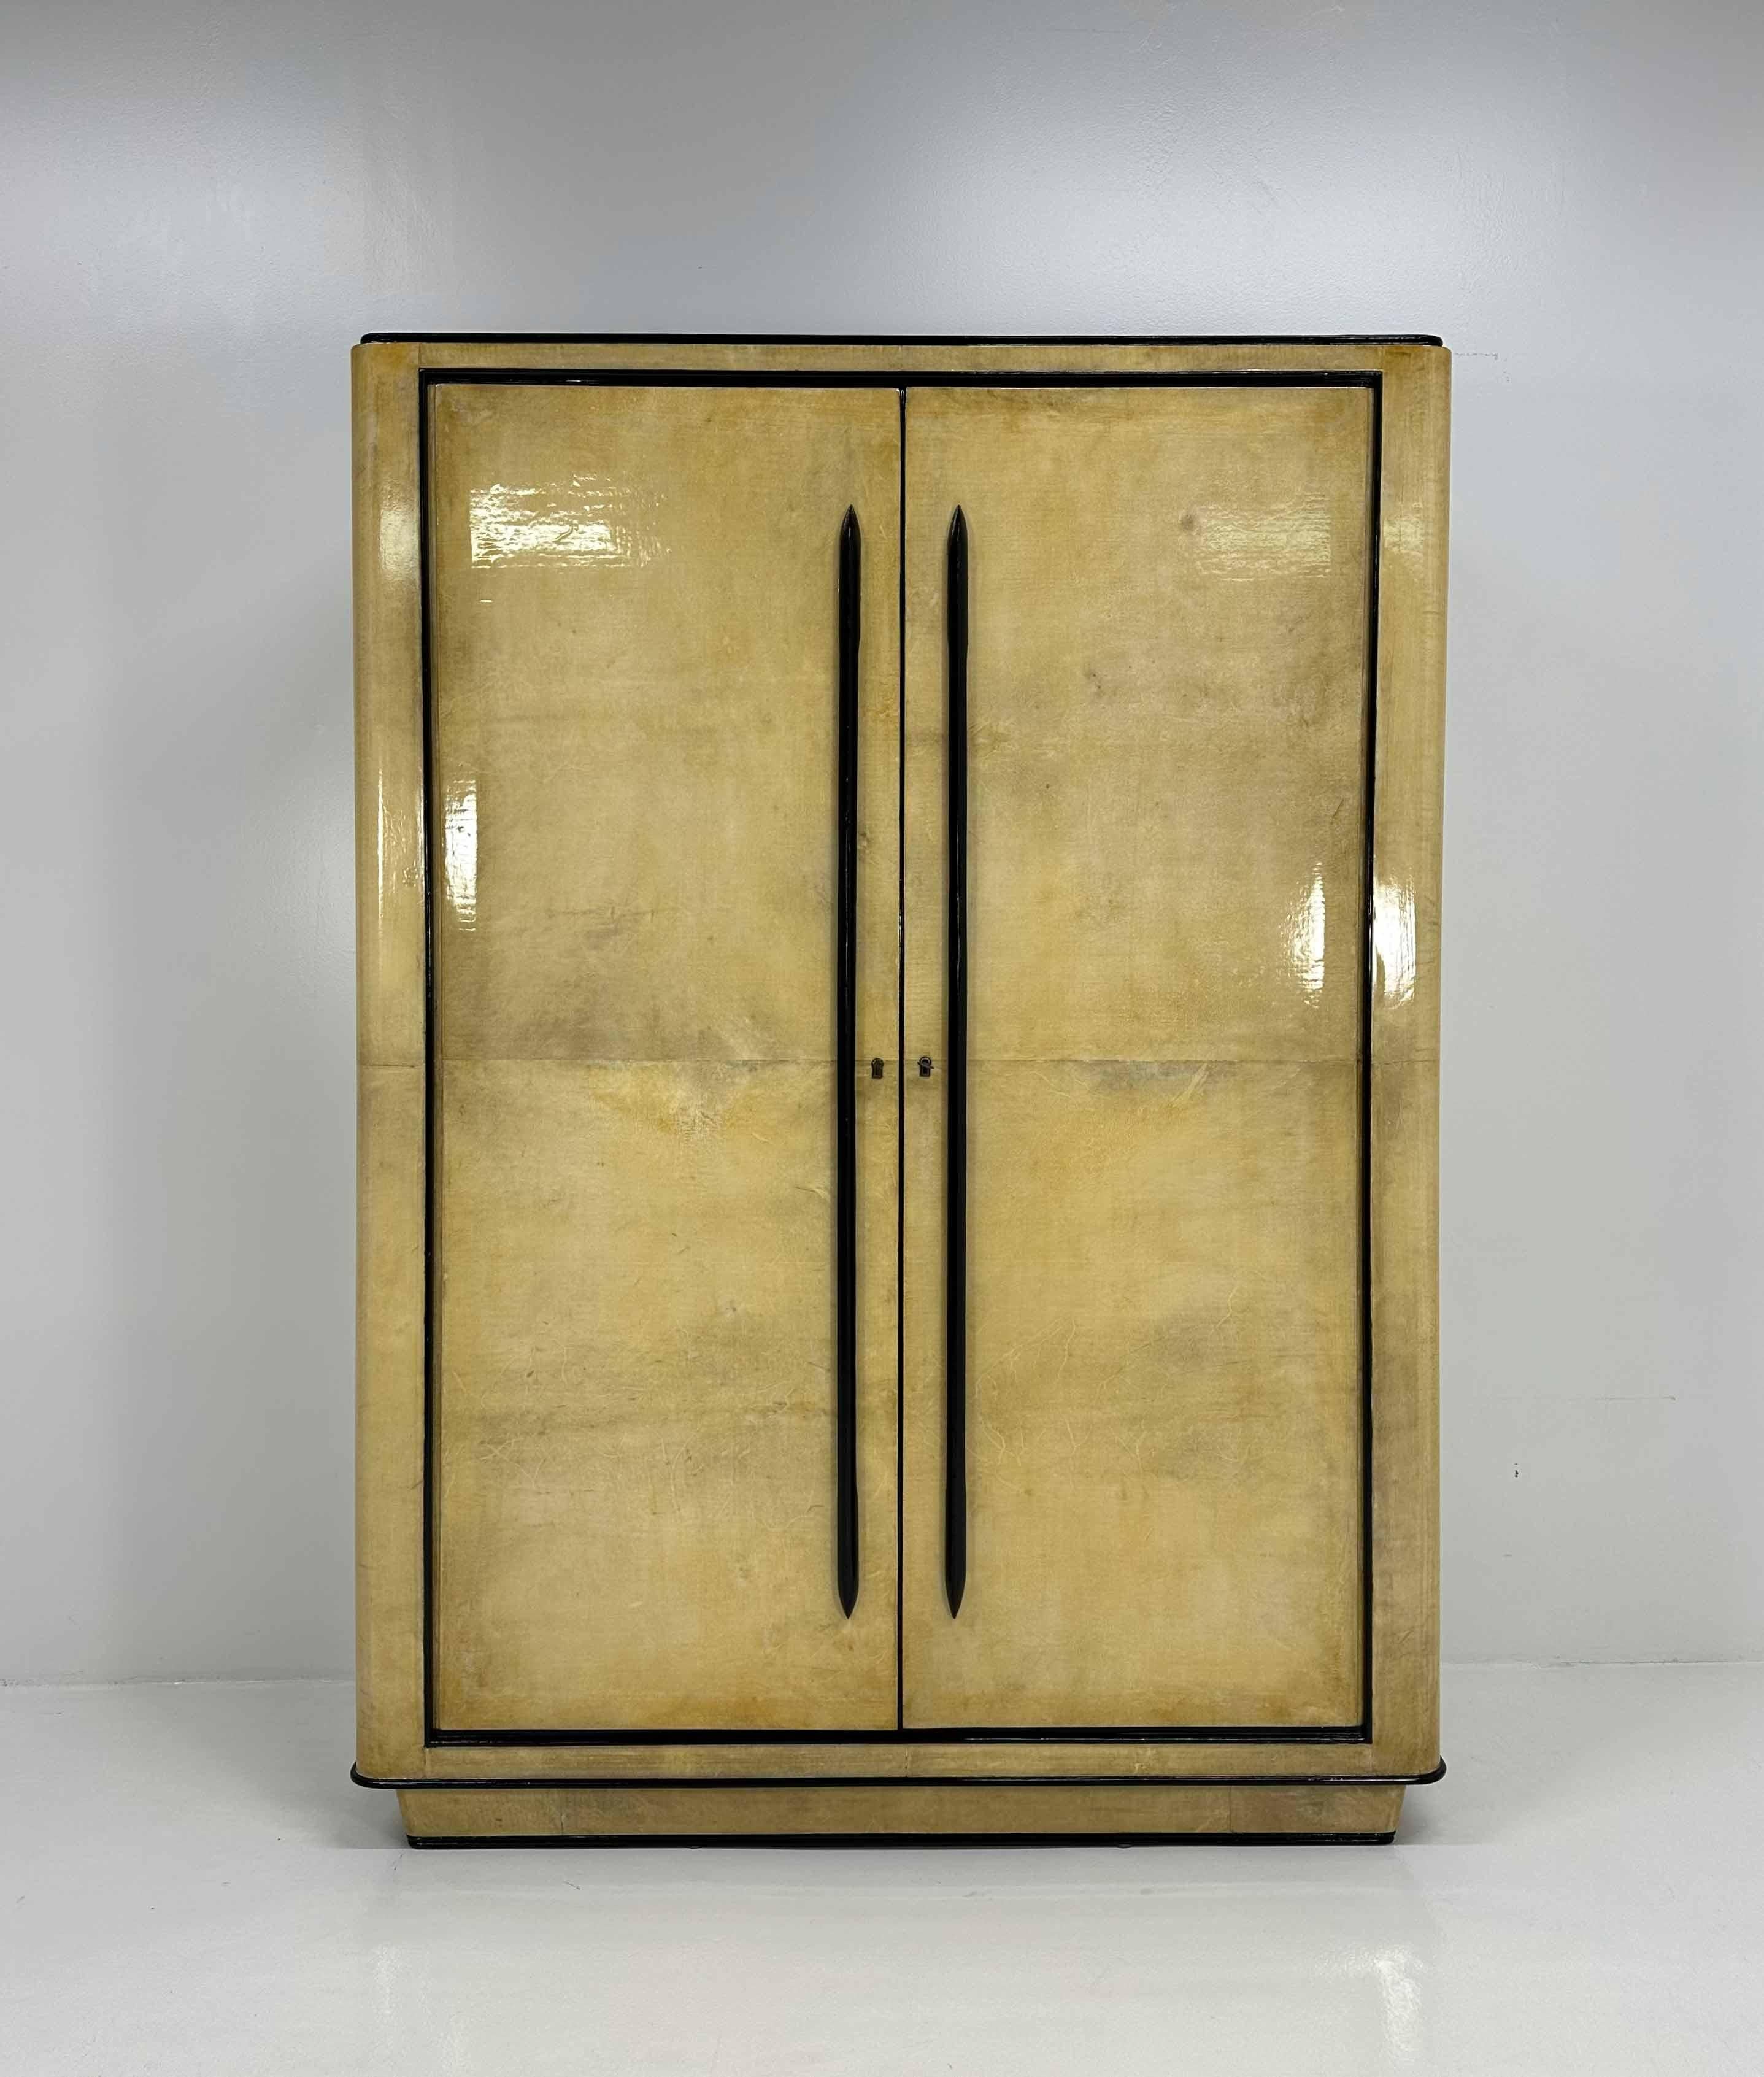 This stunning Art Deco Armoire was produced in Italy and it is attributable to Guglielmo Ulrich. 
It is completely covered in Parchment (goat skin) and has details, such as the handles and the profiles, walnut dyed. 
On the interiors there is a wide